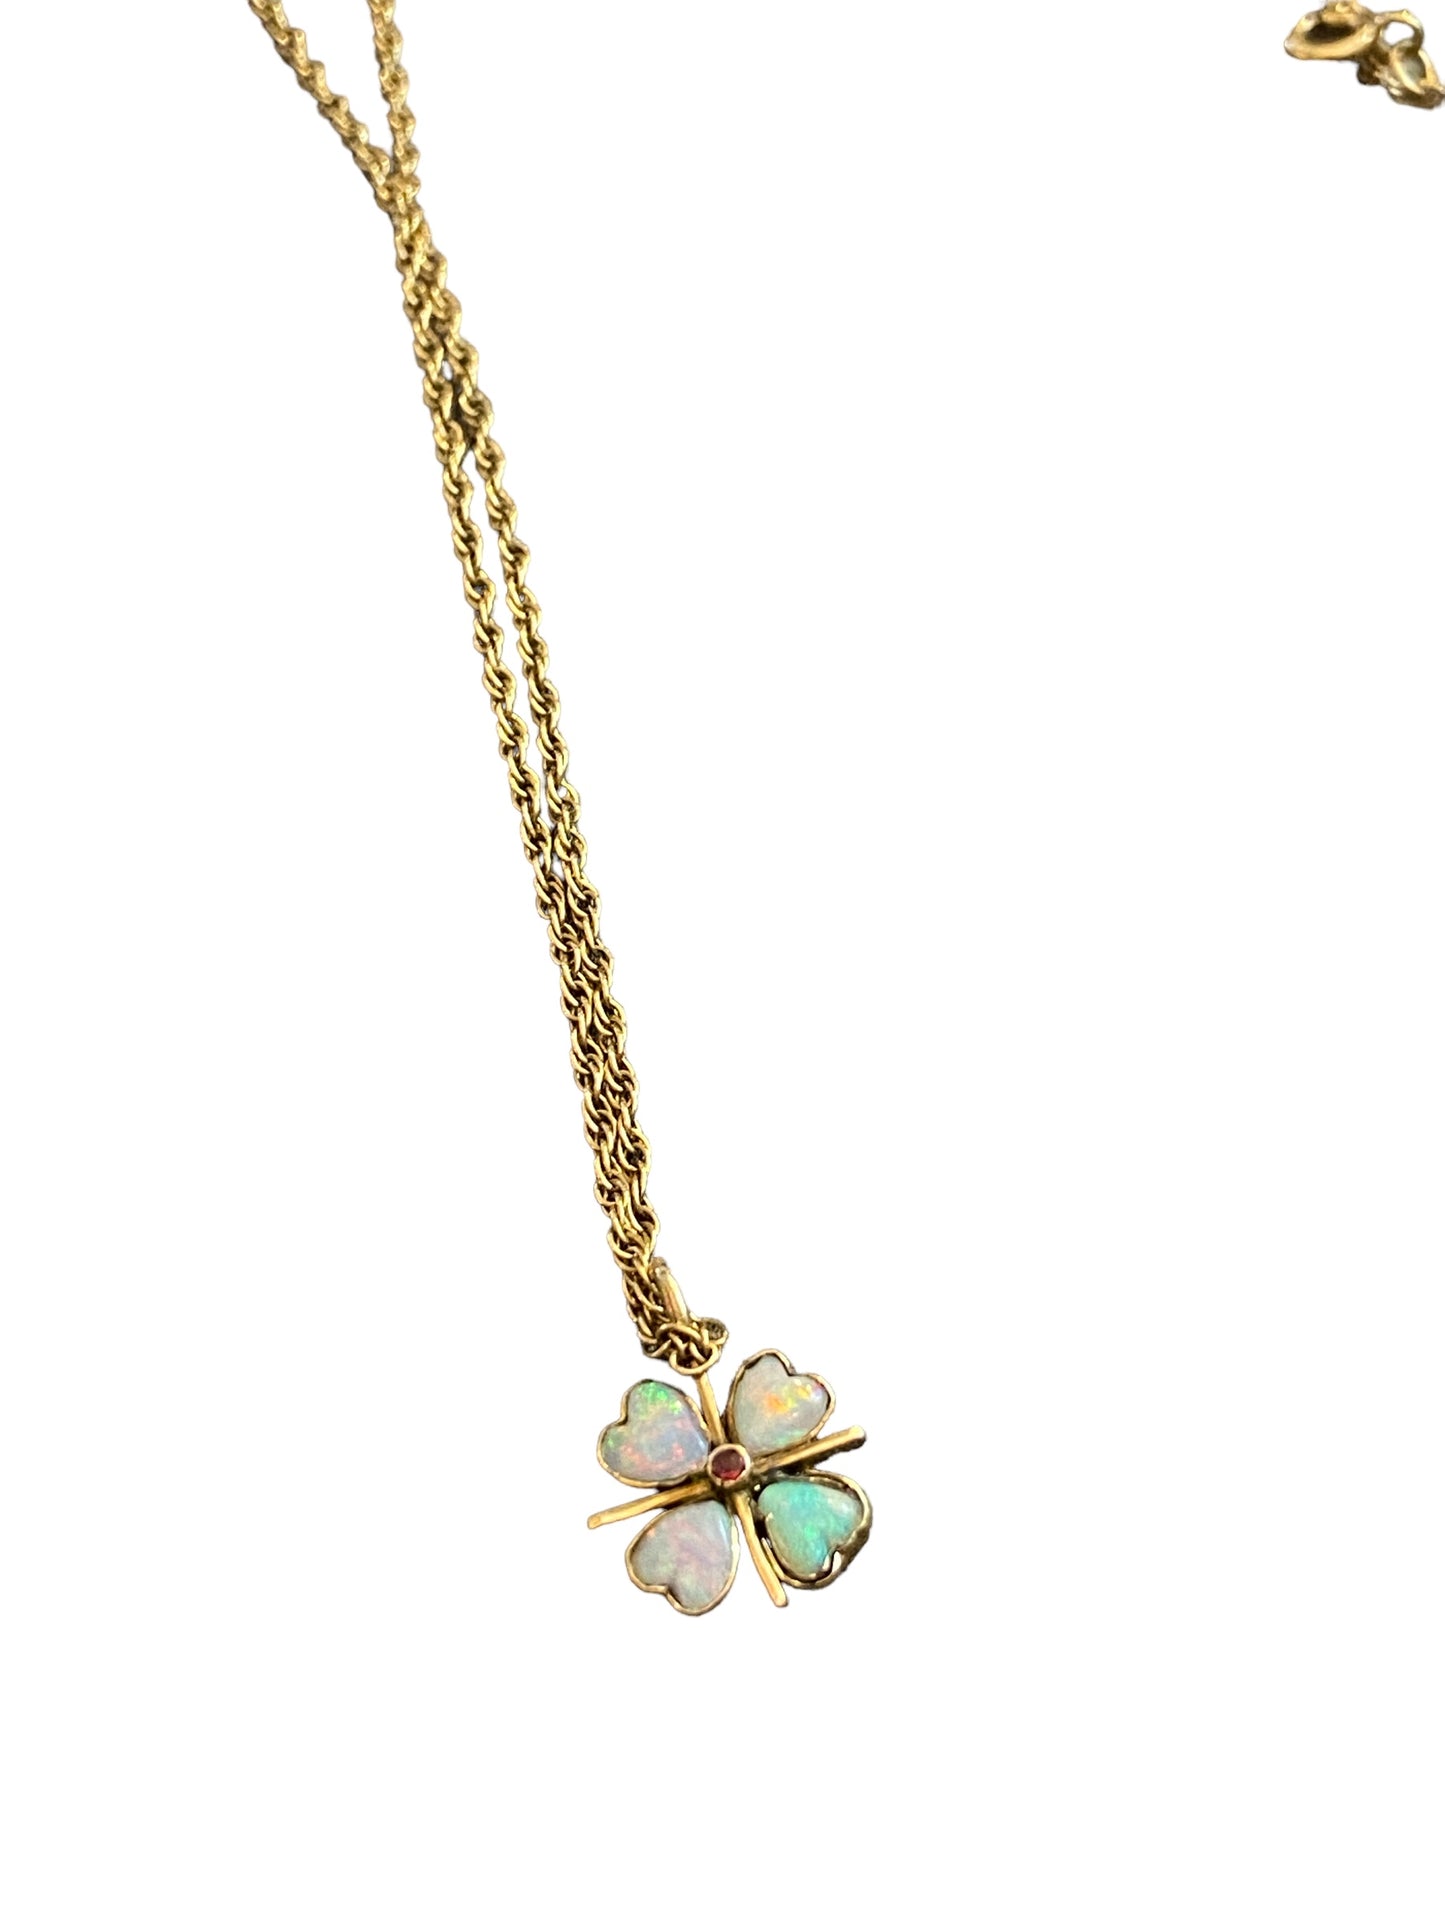 9ct vintage four leaf clover pendant with opals and 20 inch chain